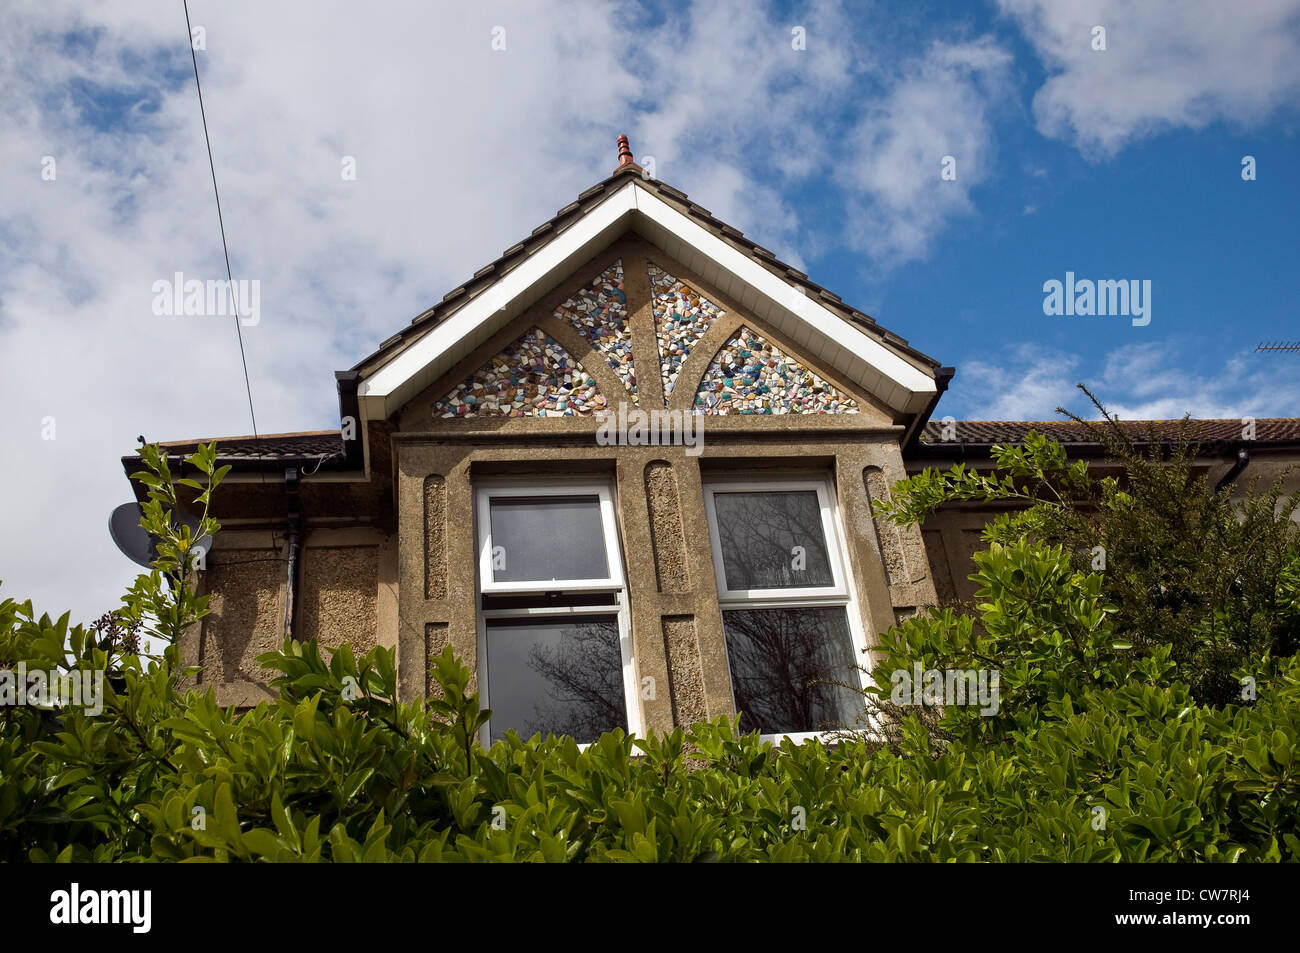 Unusual Edwardian house with gables decorated with broken pieces of ceramic crockery in Worthing, West Sussex, UK Stock Photo